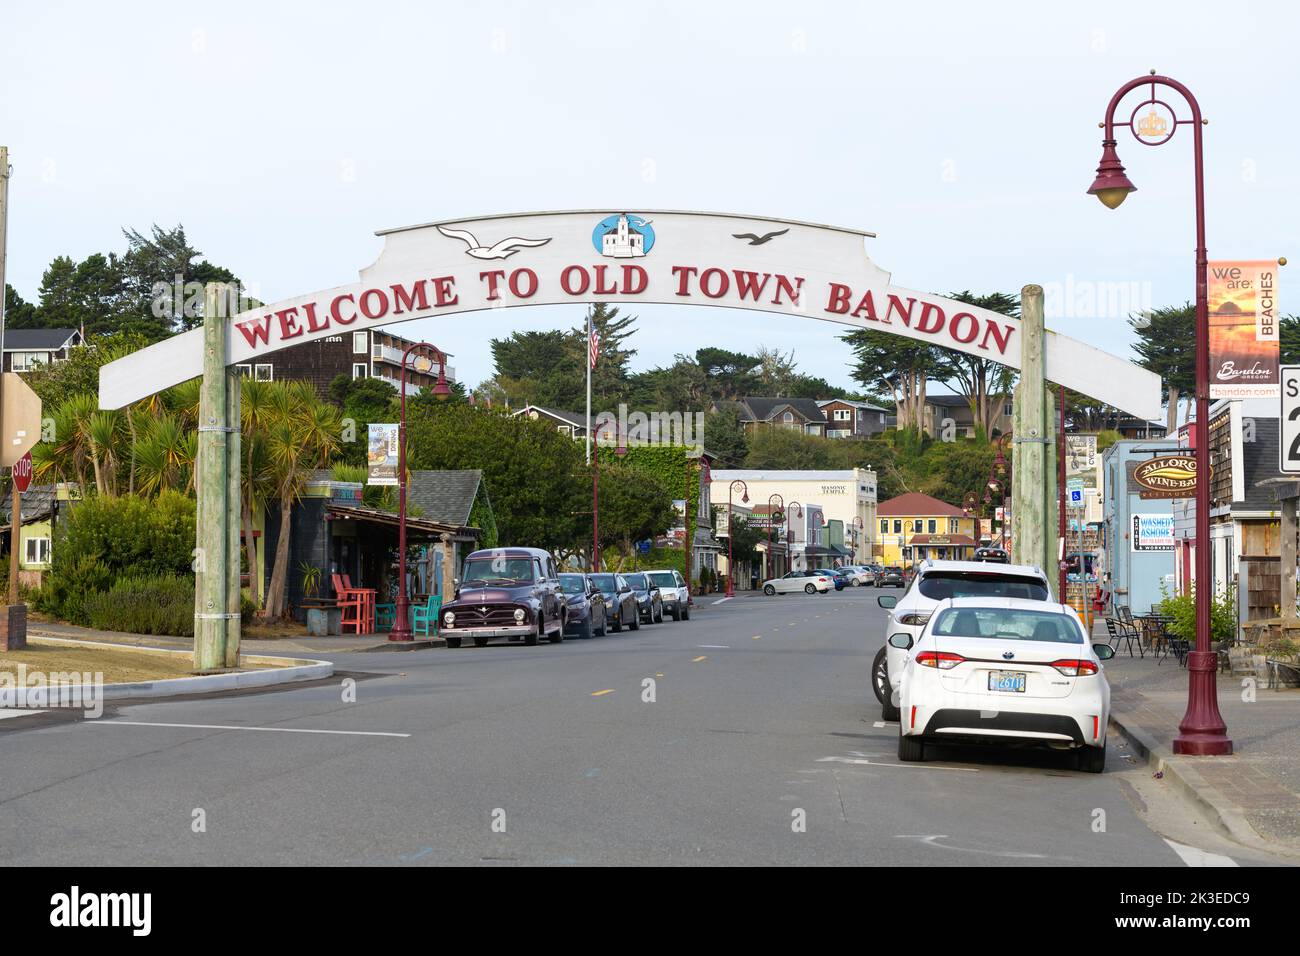 Bandon, OR, USA - September 17, 2022; Sign over street with words Welcome to Old Town Bandon, a city on the Oregon Coast Stock Photo